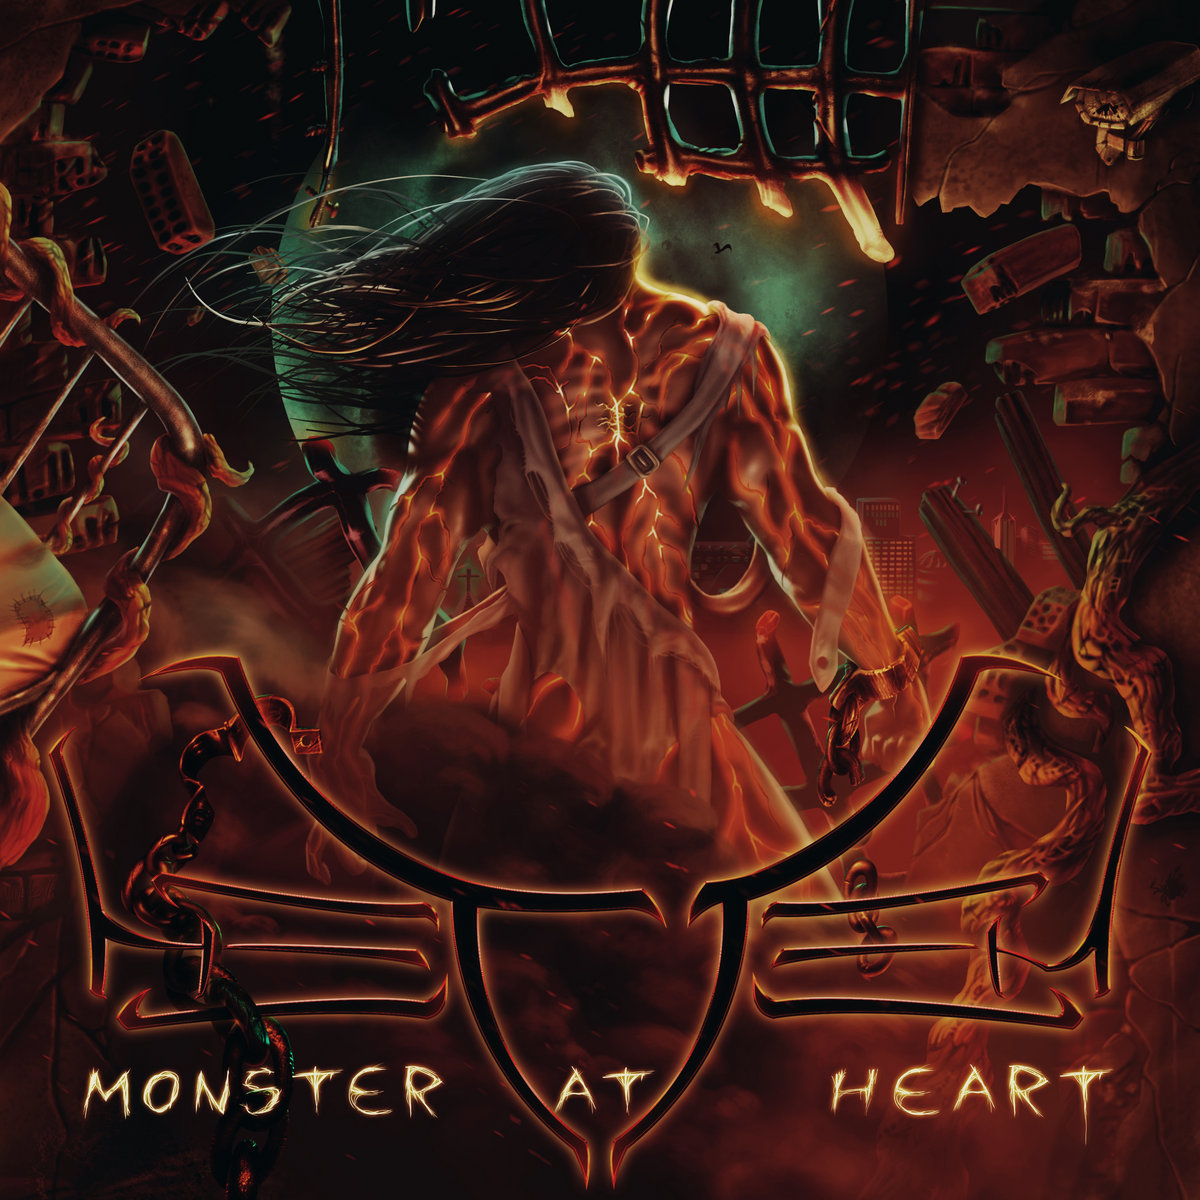 ALBUM REVIEW: Monster at Heart by Hetrem